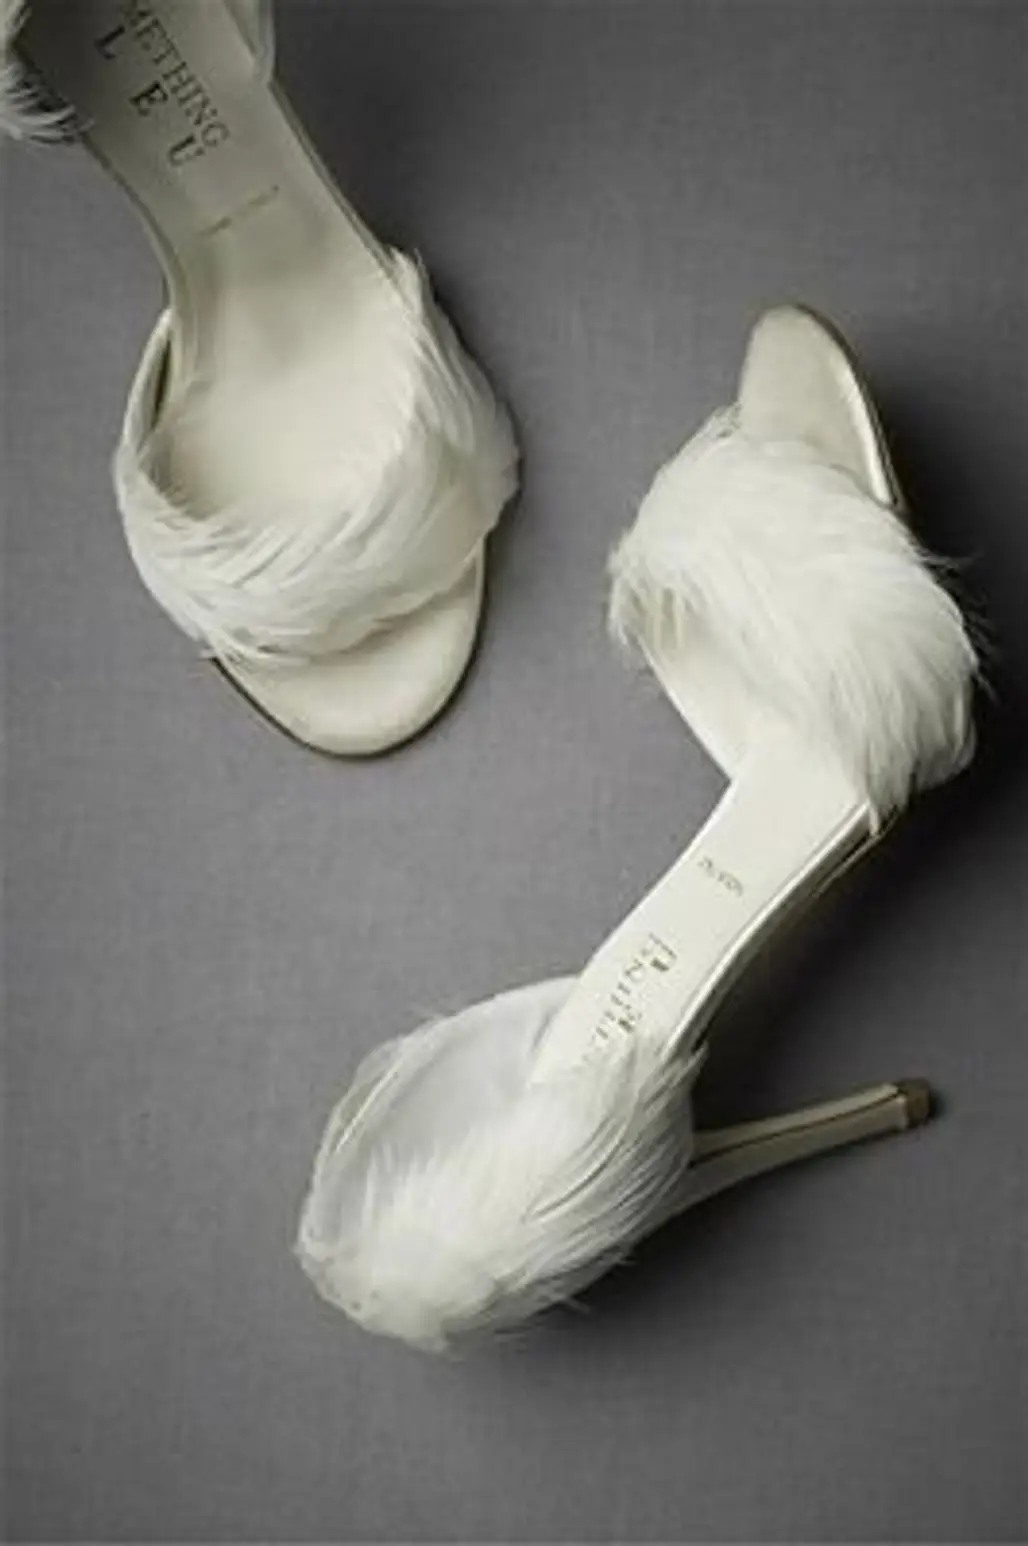 Feathered Wedding Shoes Are Magnificent